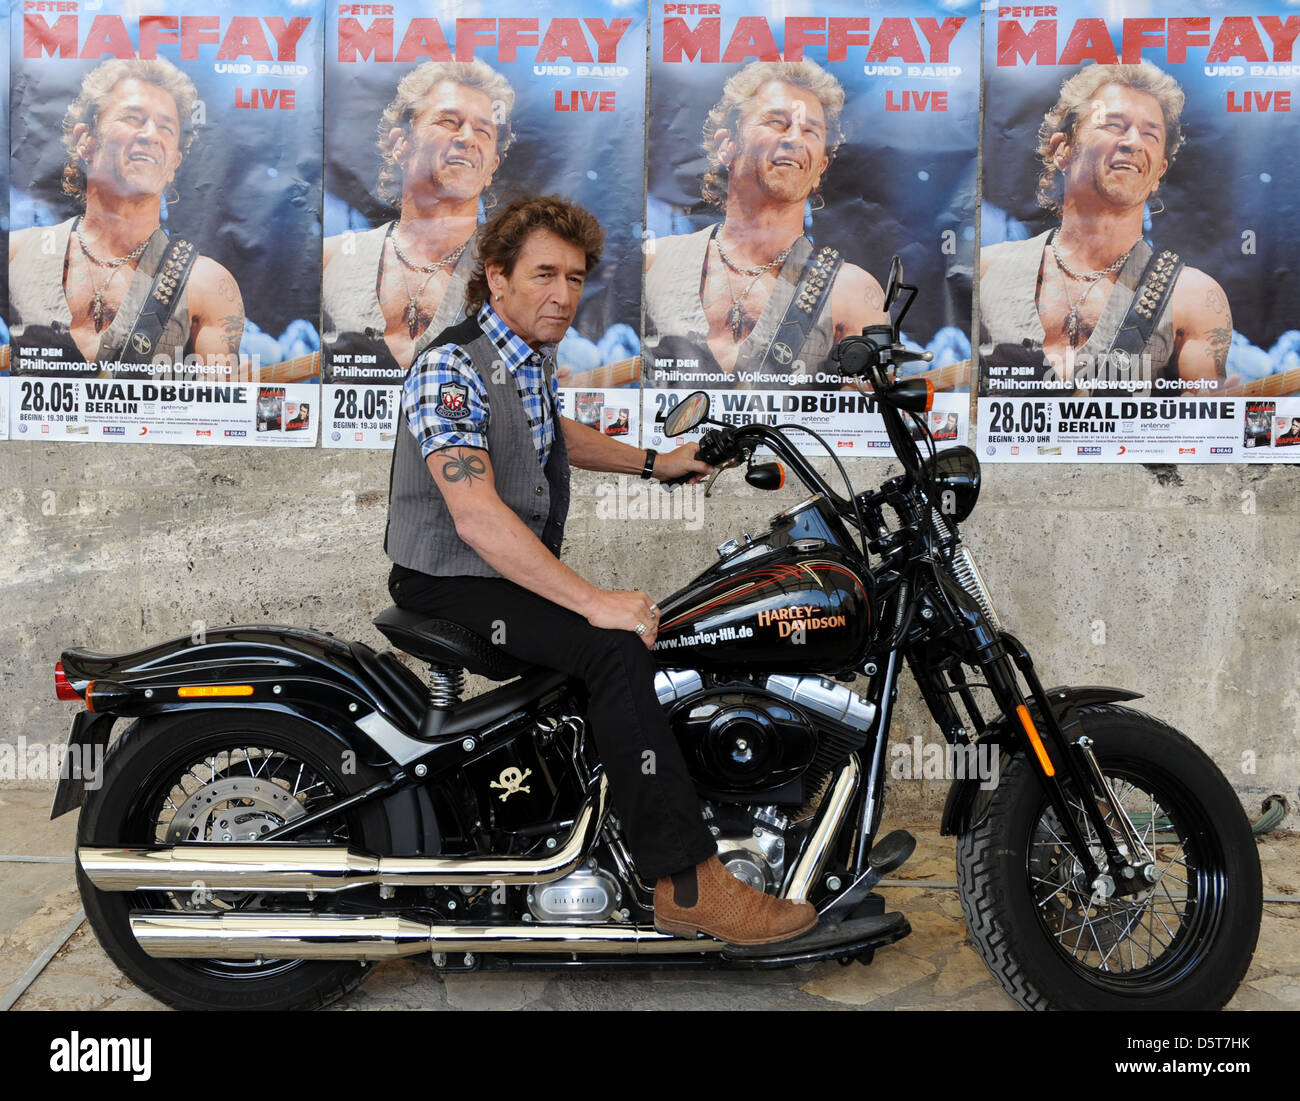 Peter Maffay promotes his upcoming tour at Waldbuehne arena at a photocall  with a Harley Davidson bike. Berlin Germany Stock Photo - Alamy